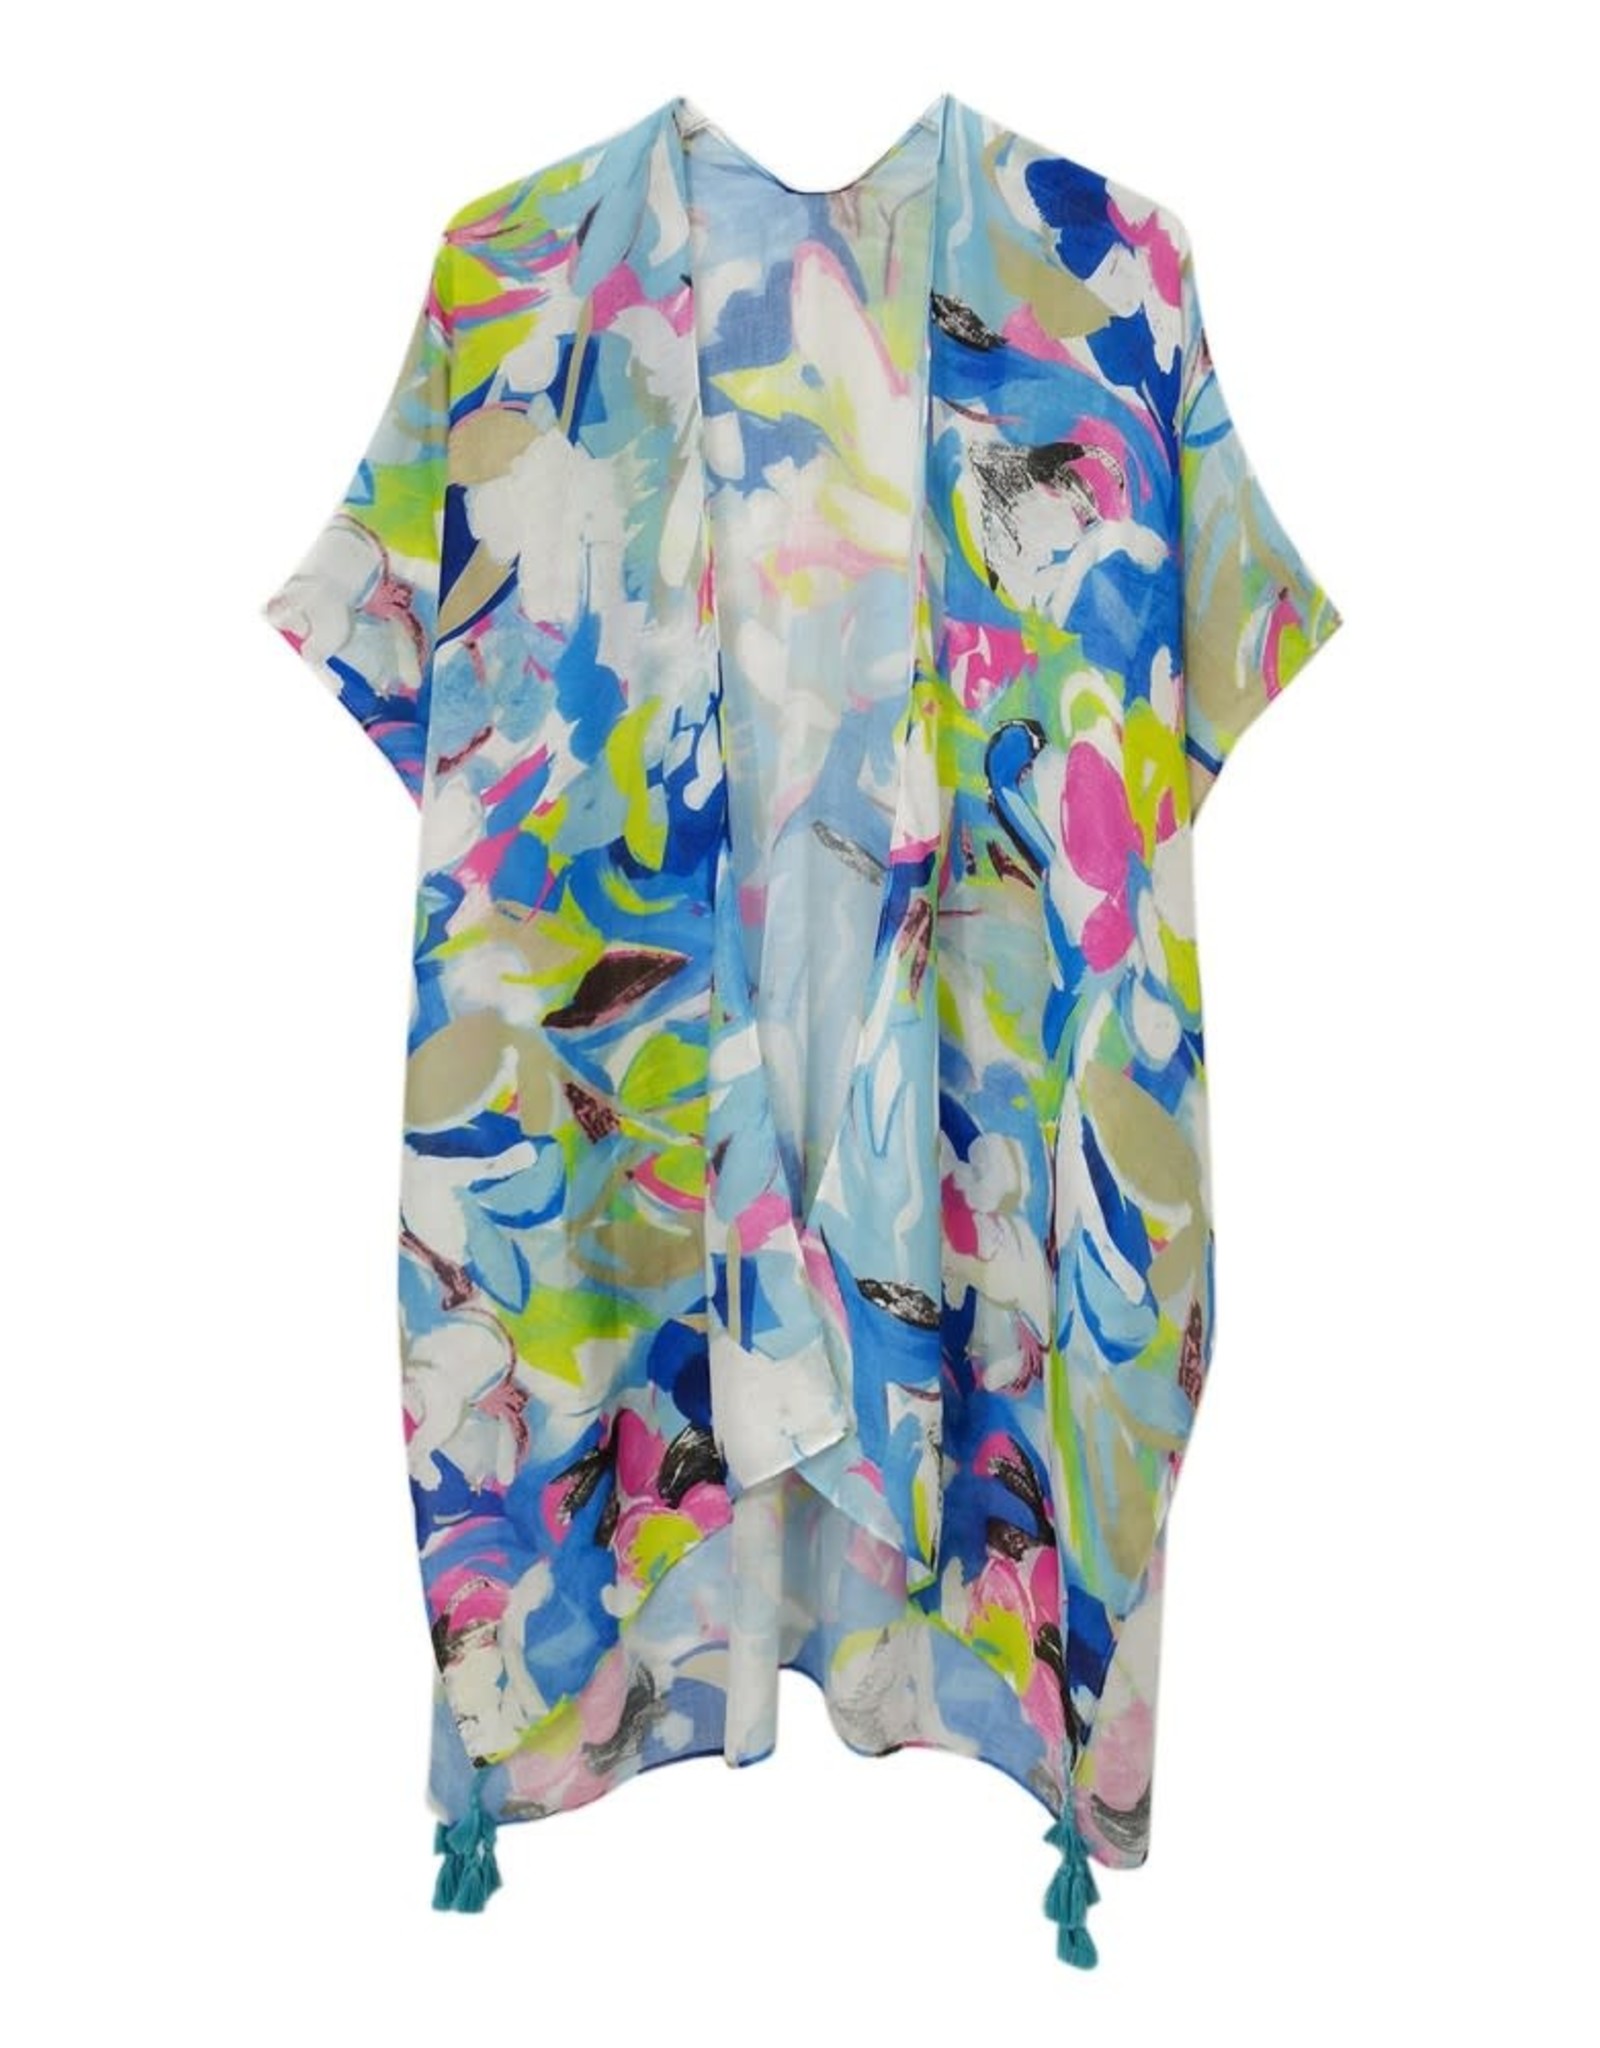 judson 7317025 - Do Everything In Love Abstract Print Kimono  - One Size - Blue